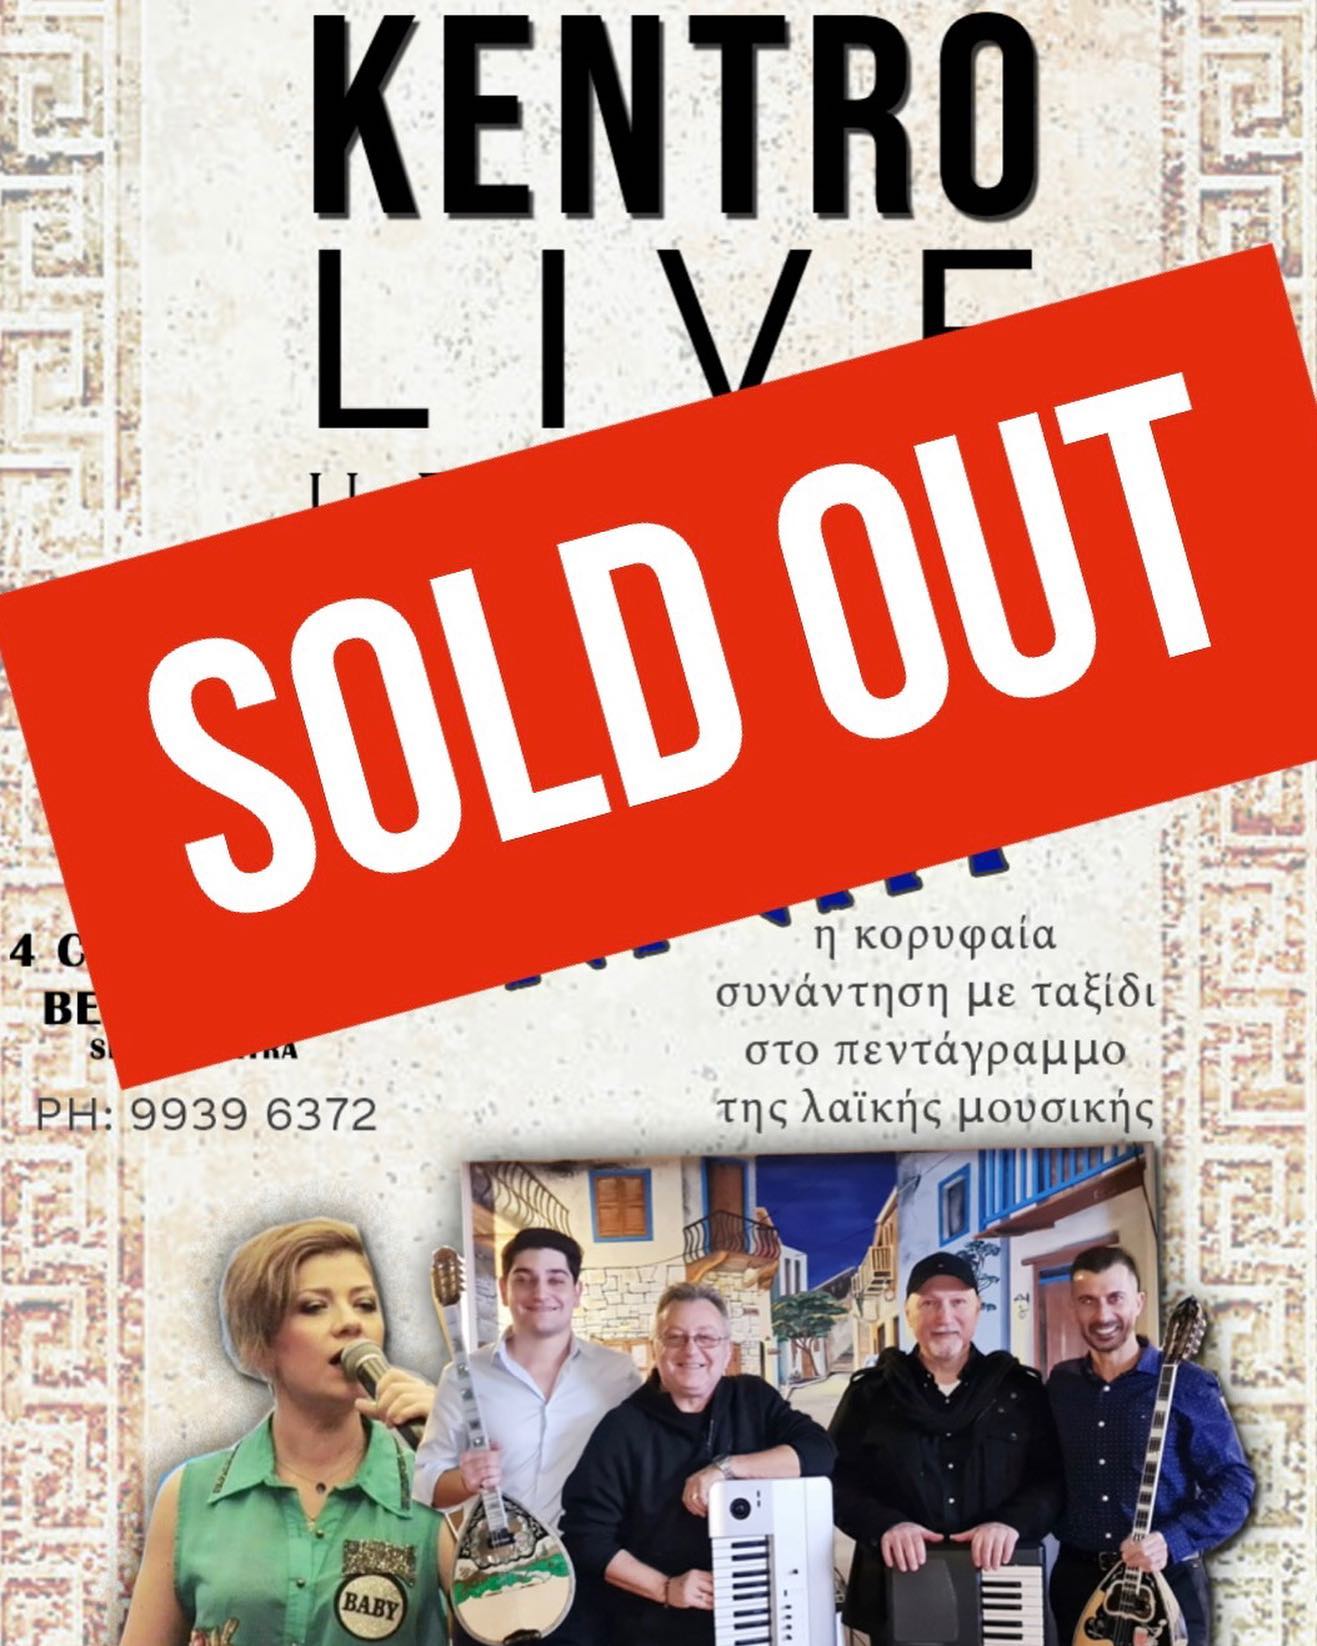 KENTRO LIVE 🎶
🇬🇷Tavern Night
!! SOLD OUT !!

See you all on the 11th of June OPA!🇬🇷🎶